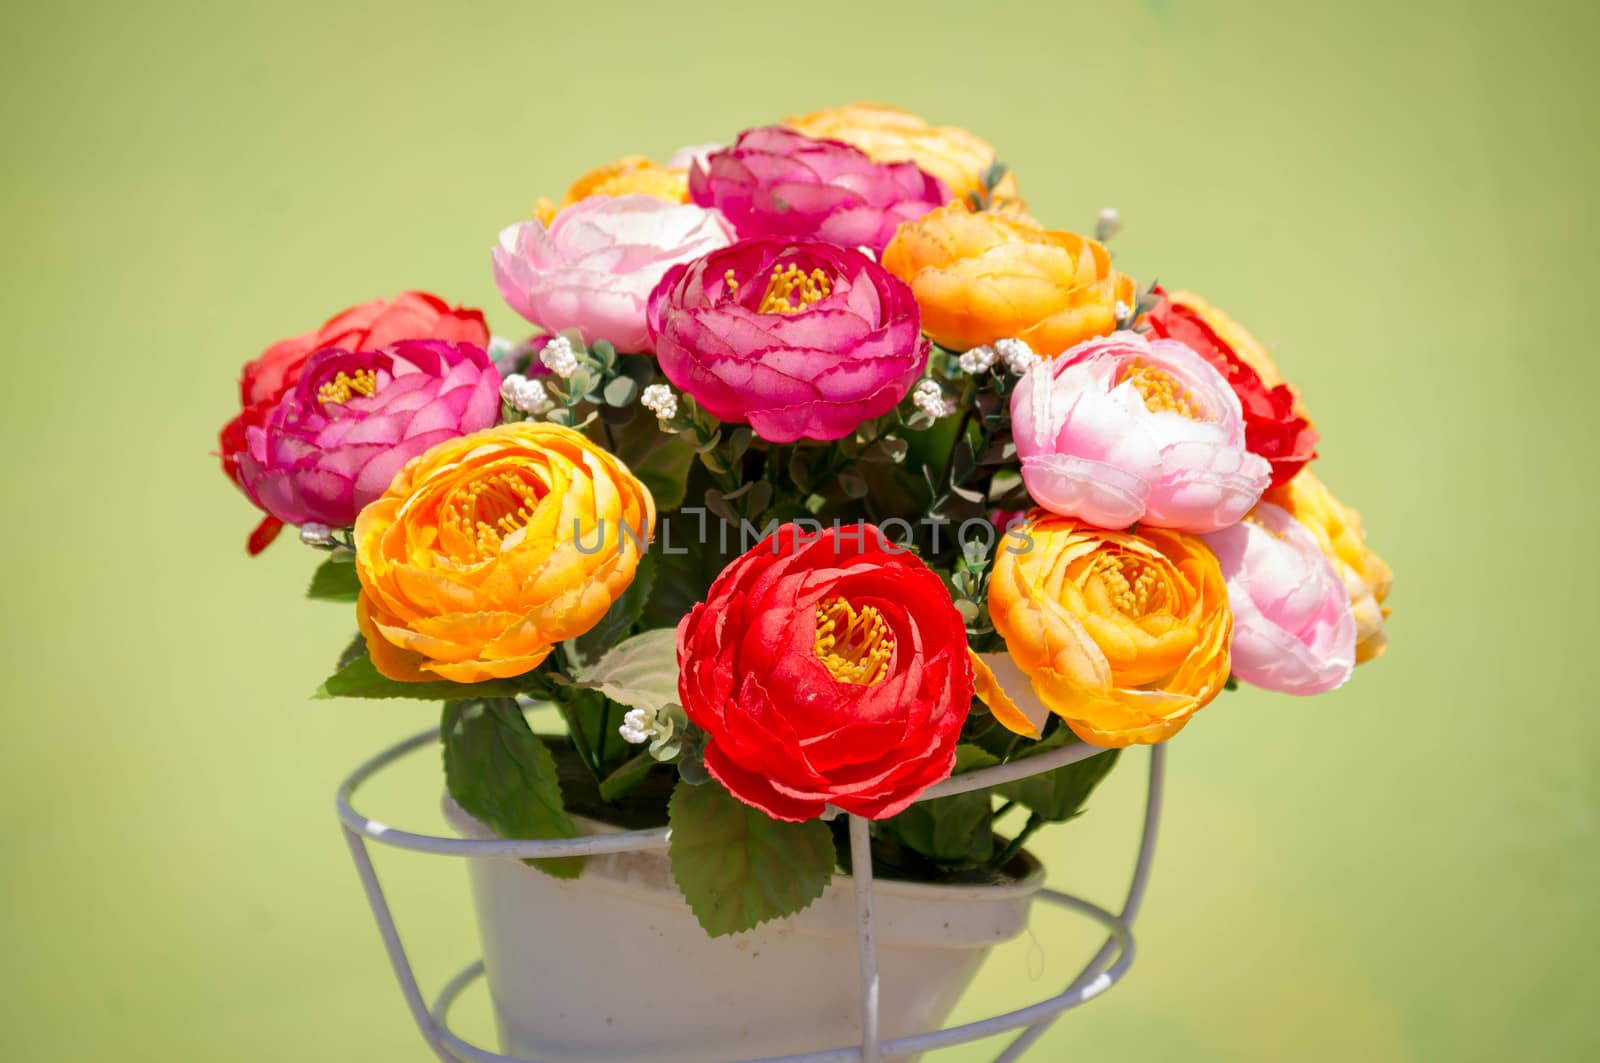 Colorful artificial flowers made from cloth.